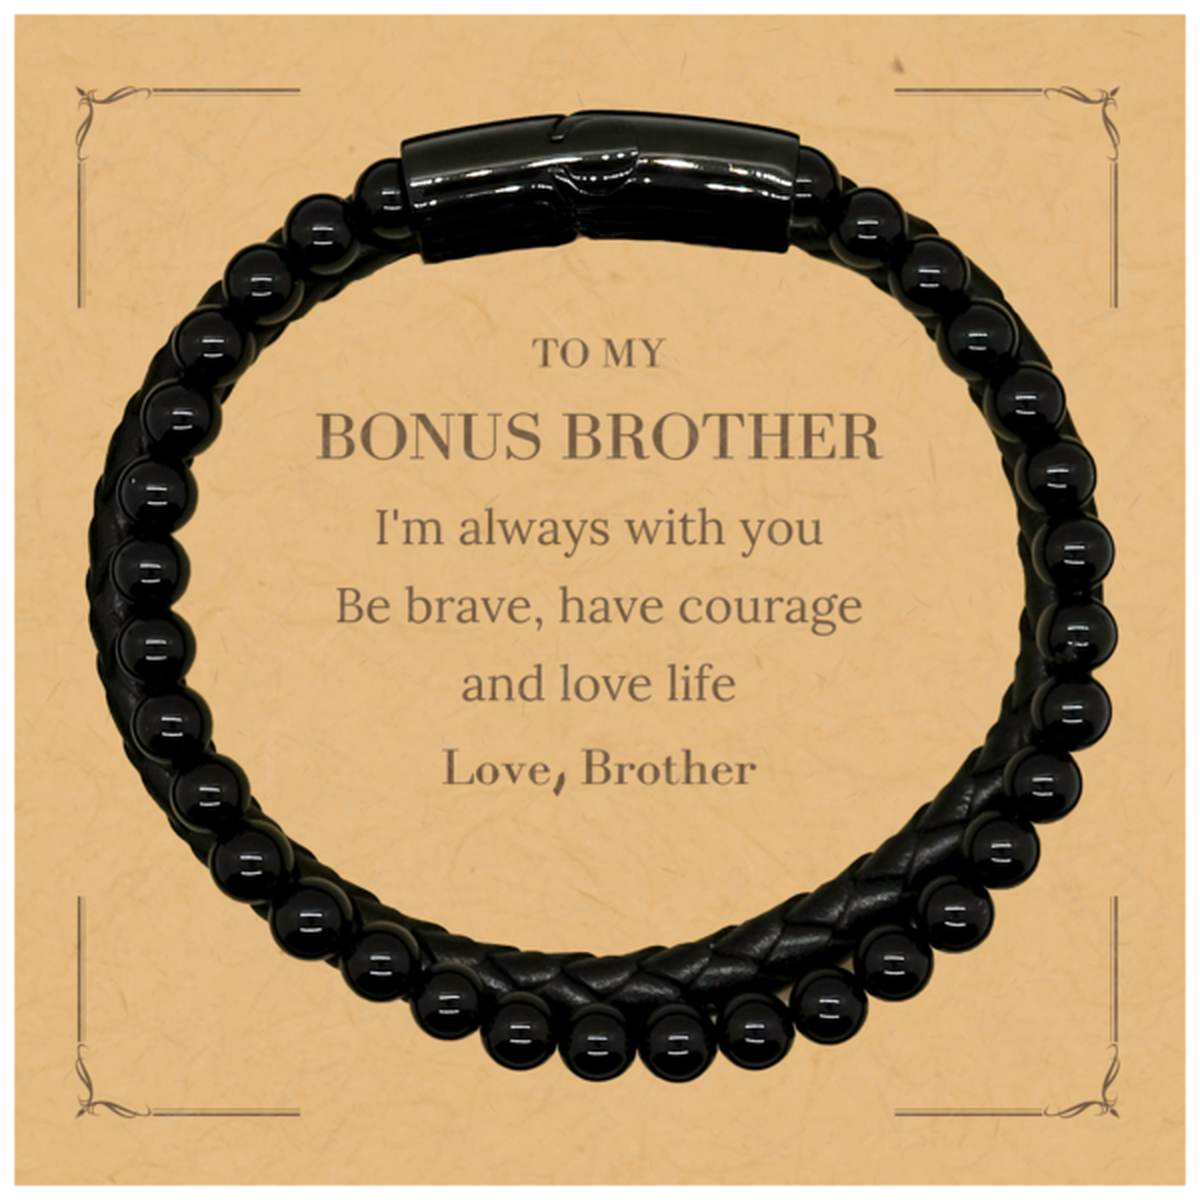 To My Bonus Brother Gifts from Brother, Unique Stone Leather Bracelets Inspirational Christmas Birthday Graduation Gifts for Bonus Brother I'm always with you. Be brave, have courage and love life. Love, Brother